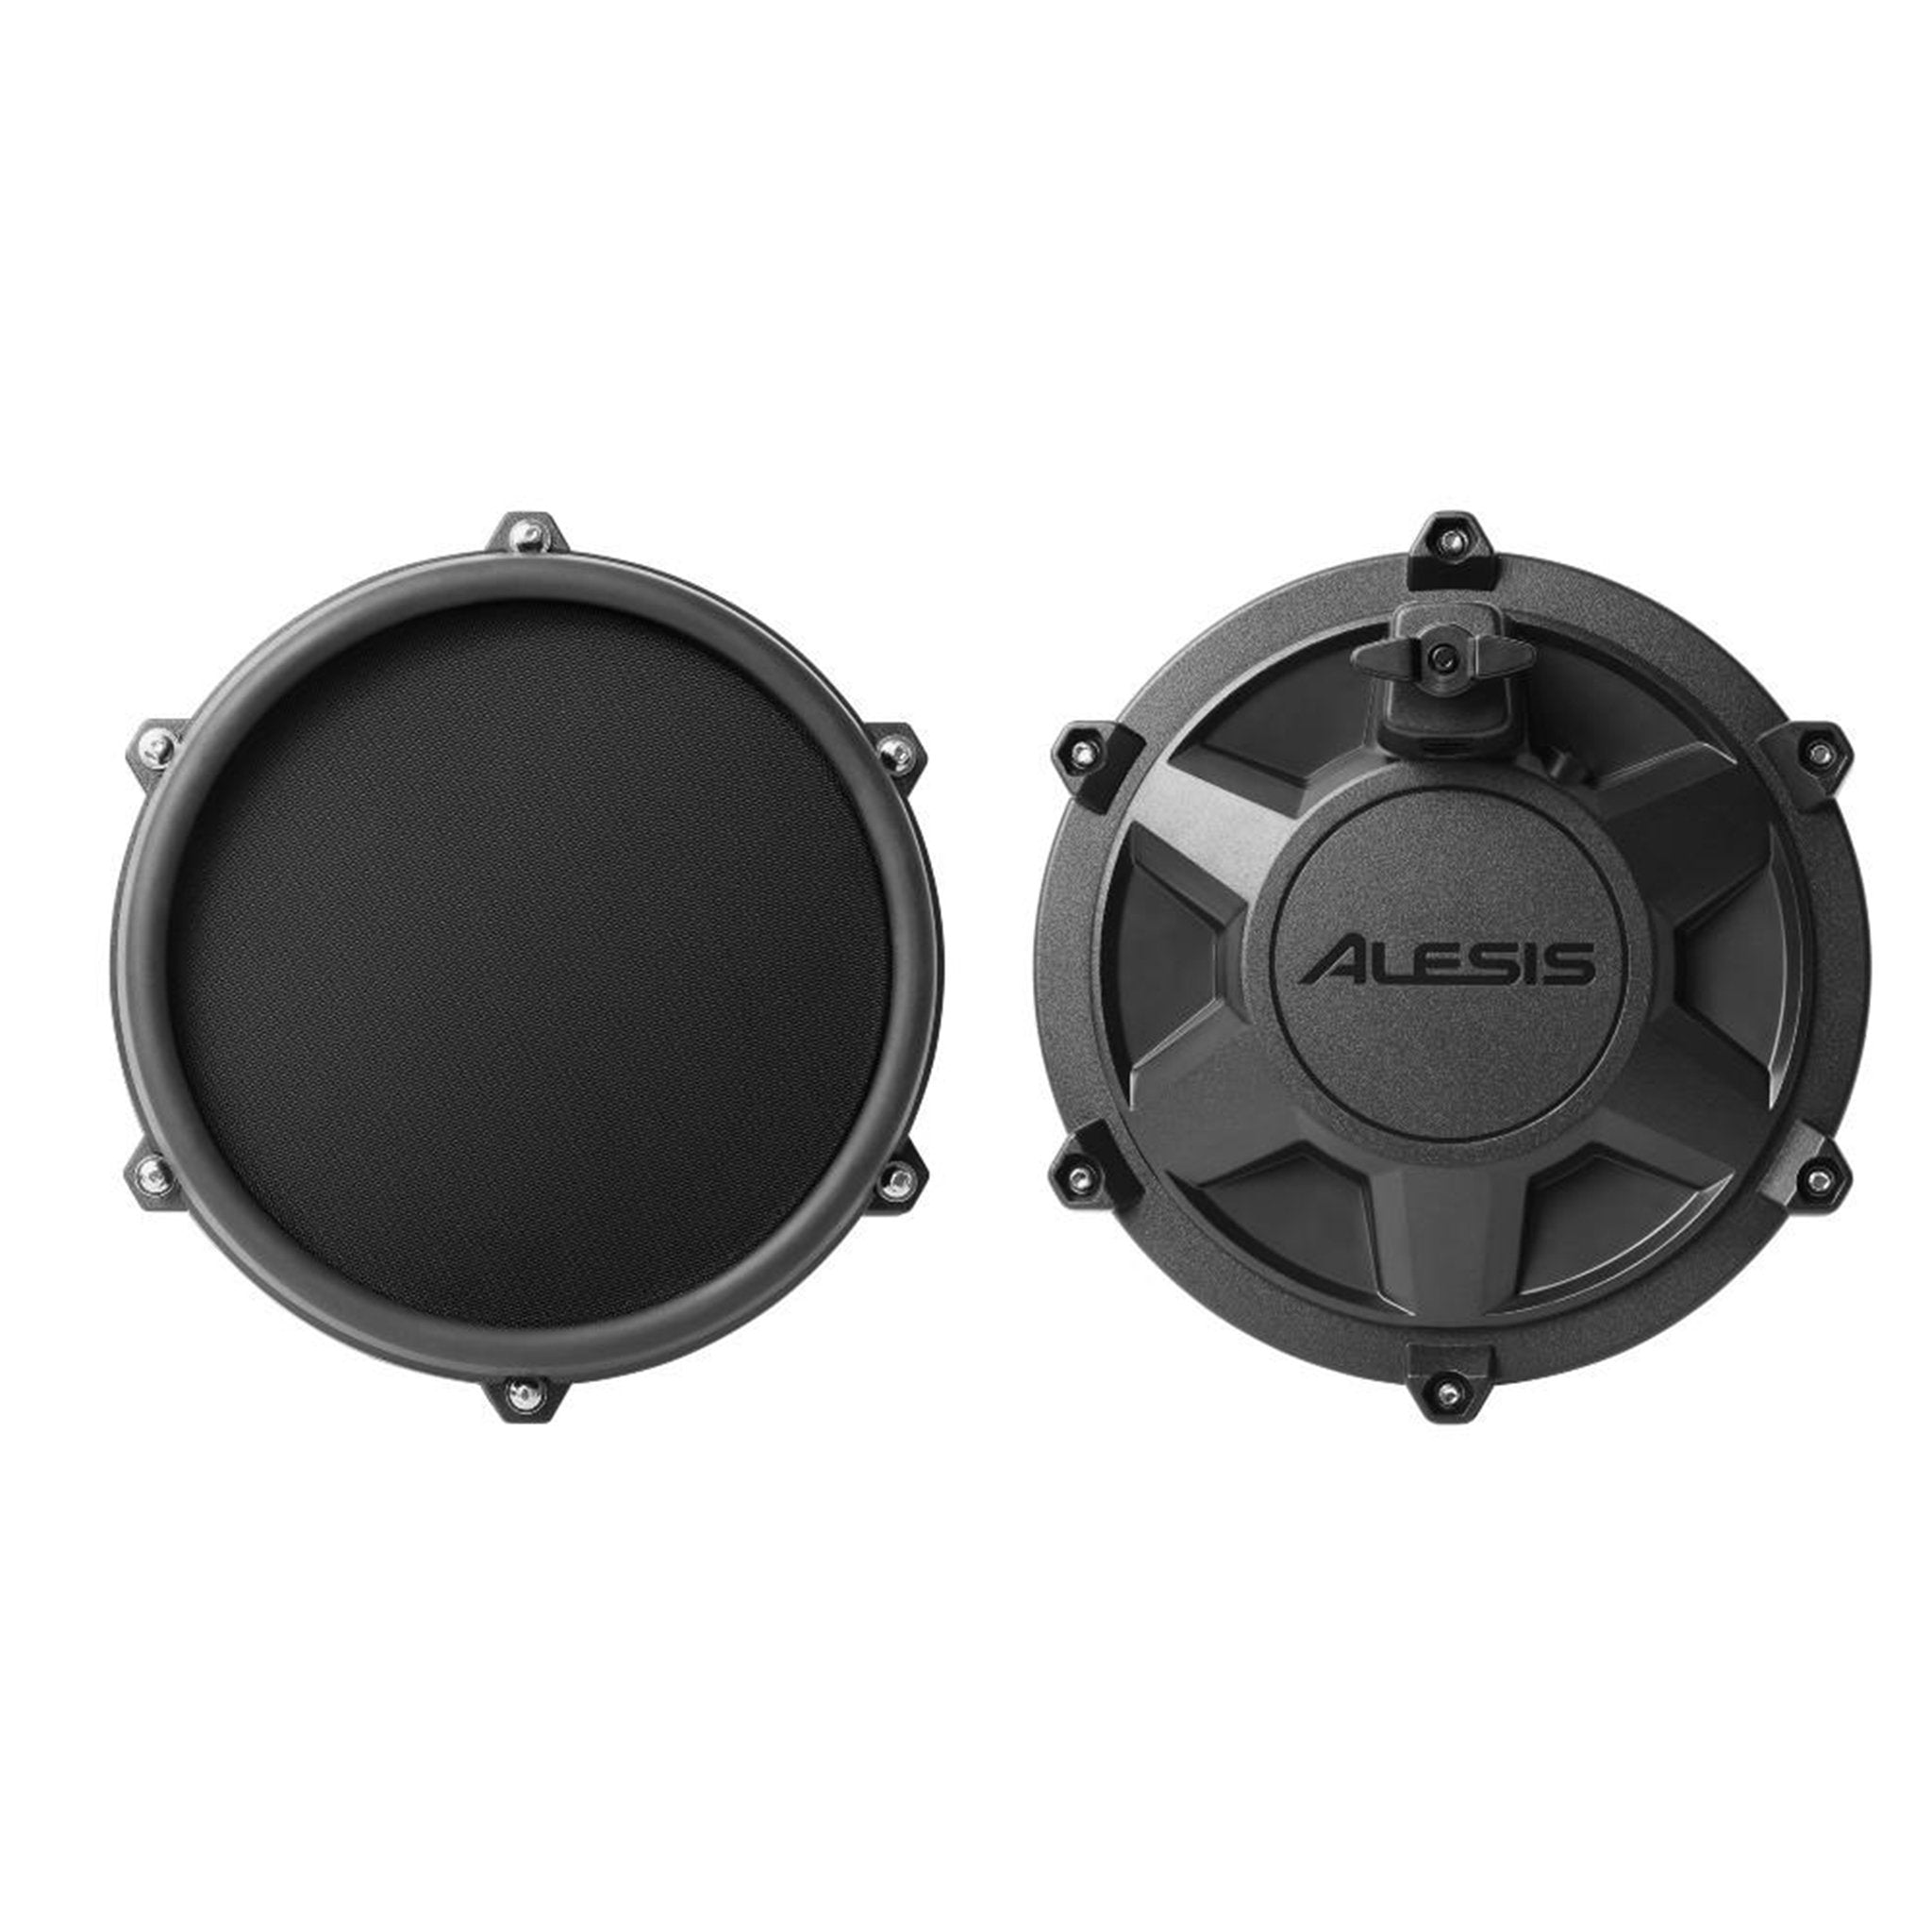 Alesis Turbo Mesh 7-Piece Electronic Drum Kit with Mesh Heads